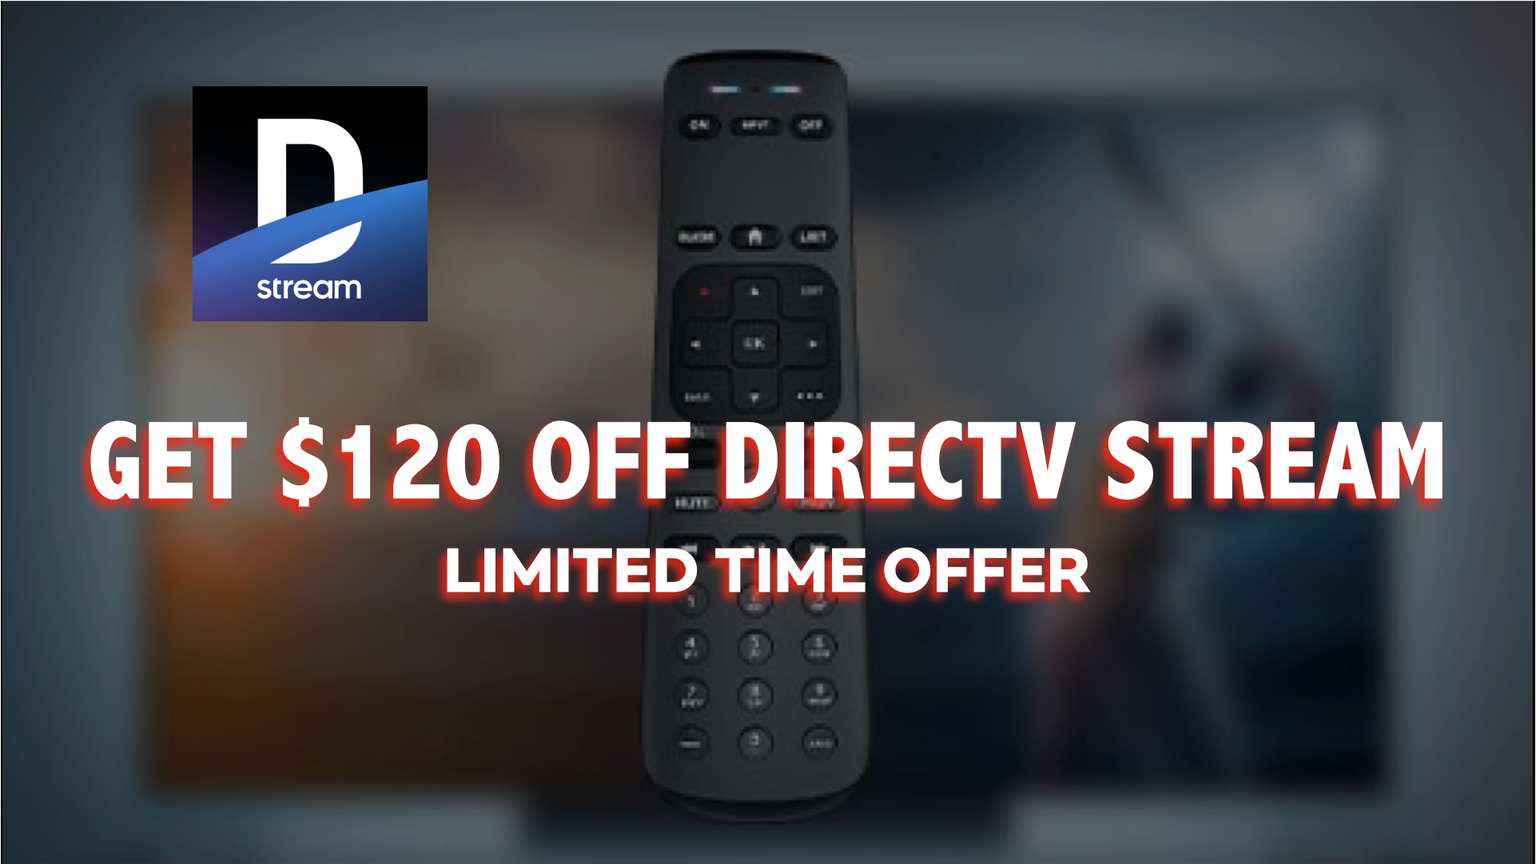 DEAL ALERT Get 120 Off DIRECTV STREAM with Purchase of Streaming